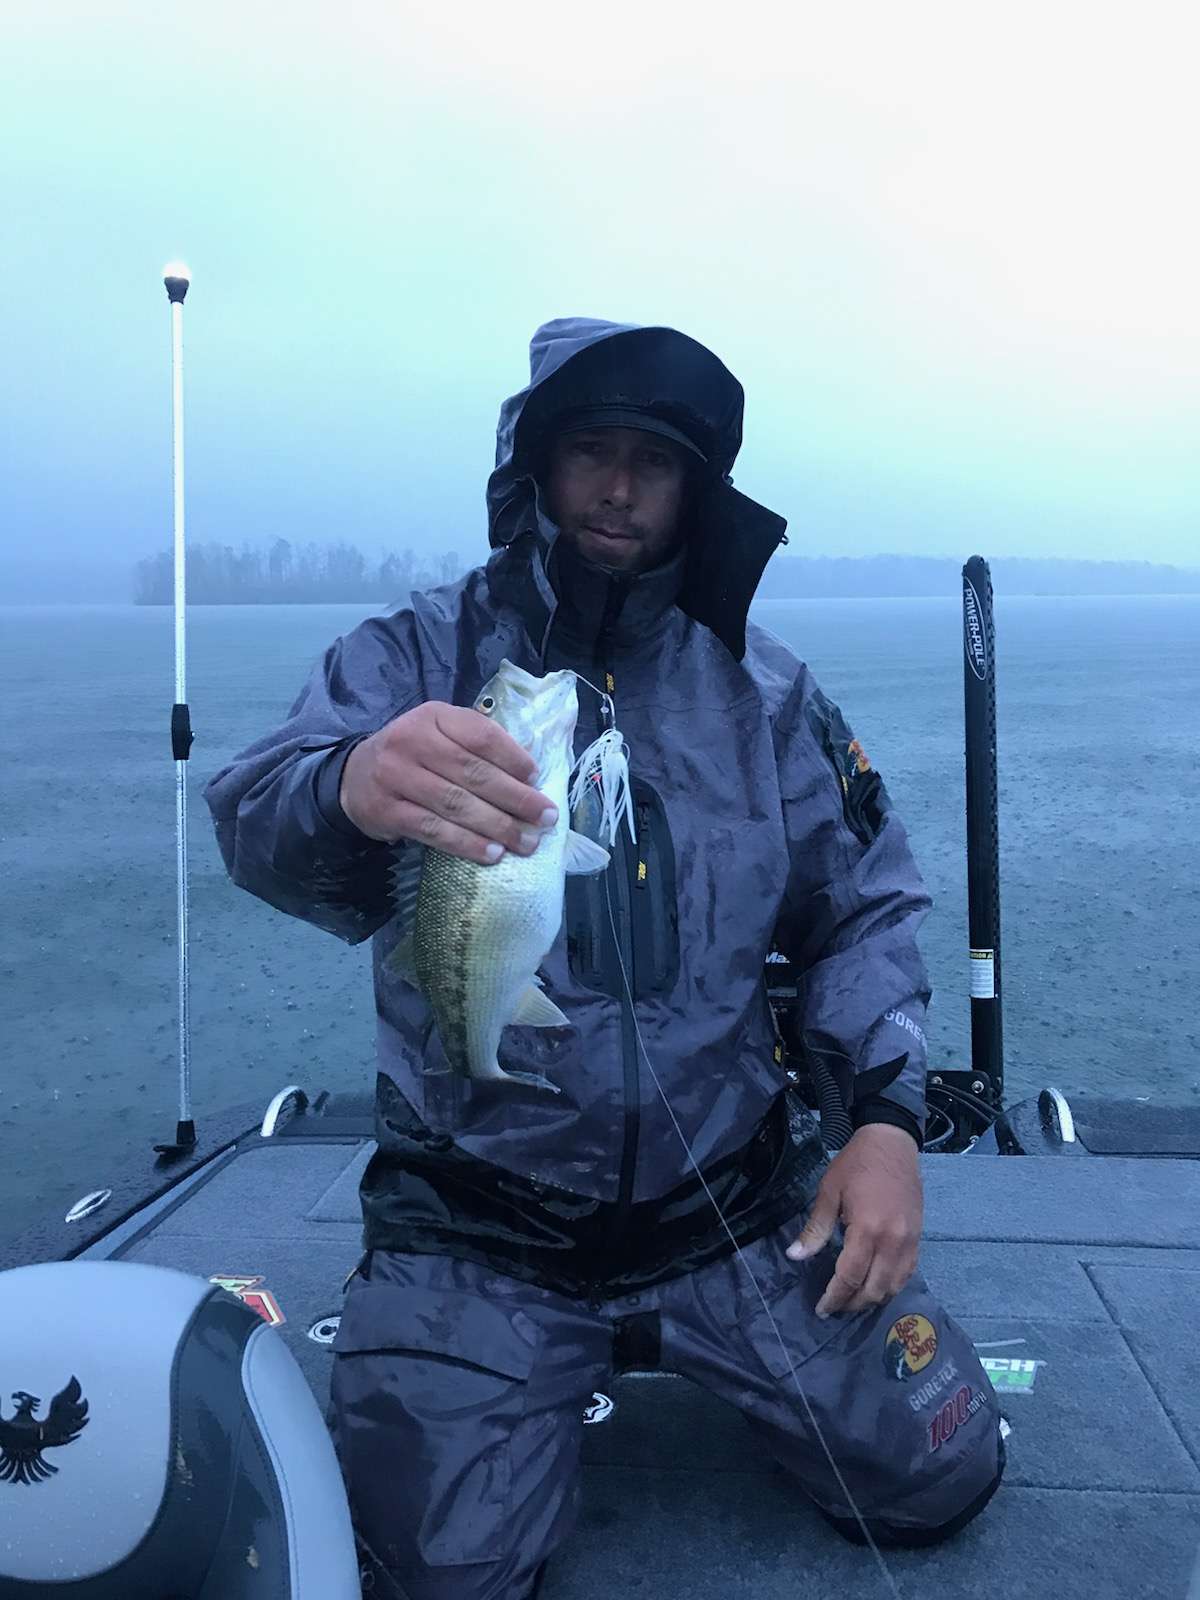 Lee Livesay hooked up early Day 2 Lake Hartwell. It's moving day, first in the boat...
